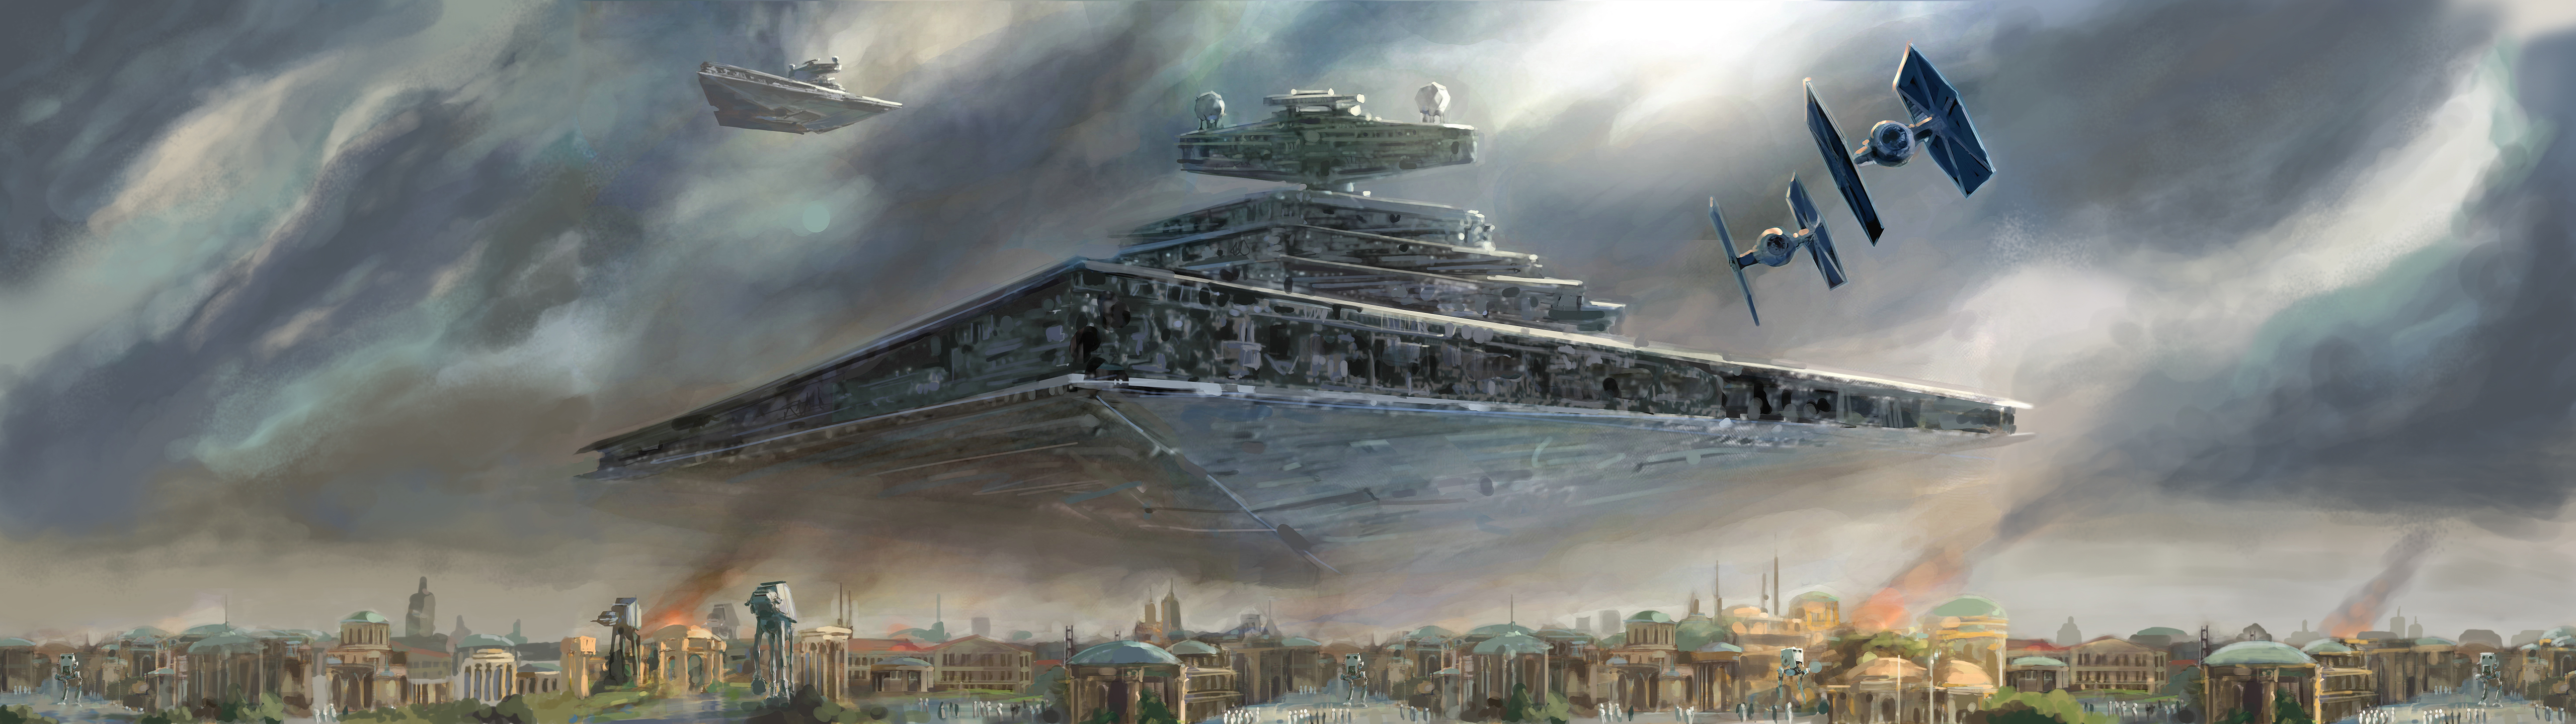 Star Destroyer Naboo TiE Fighter AT AT Walker Star Wars Painting Imperial Forces Spaceship Science F 5120x1440